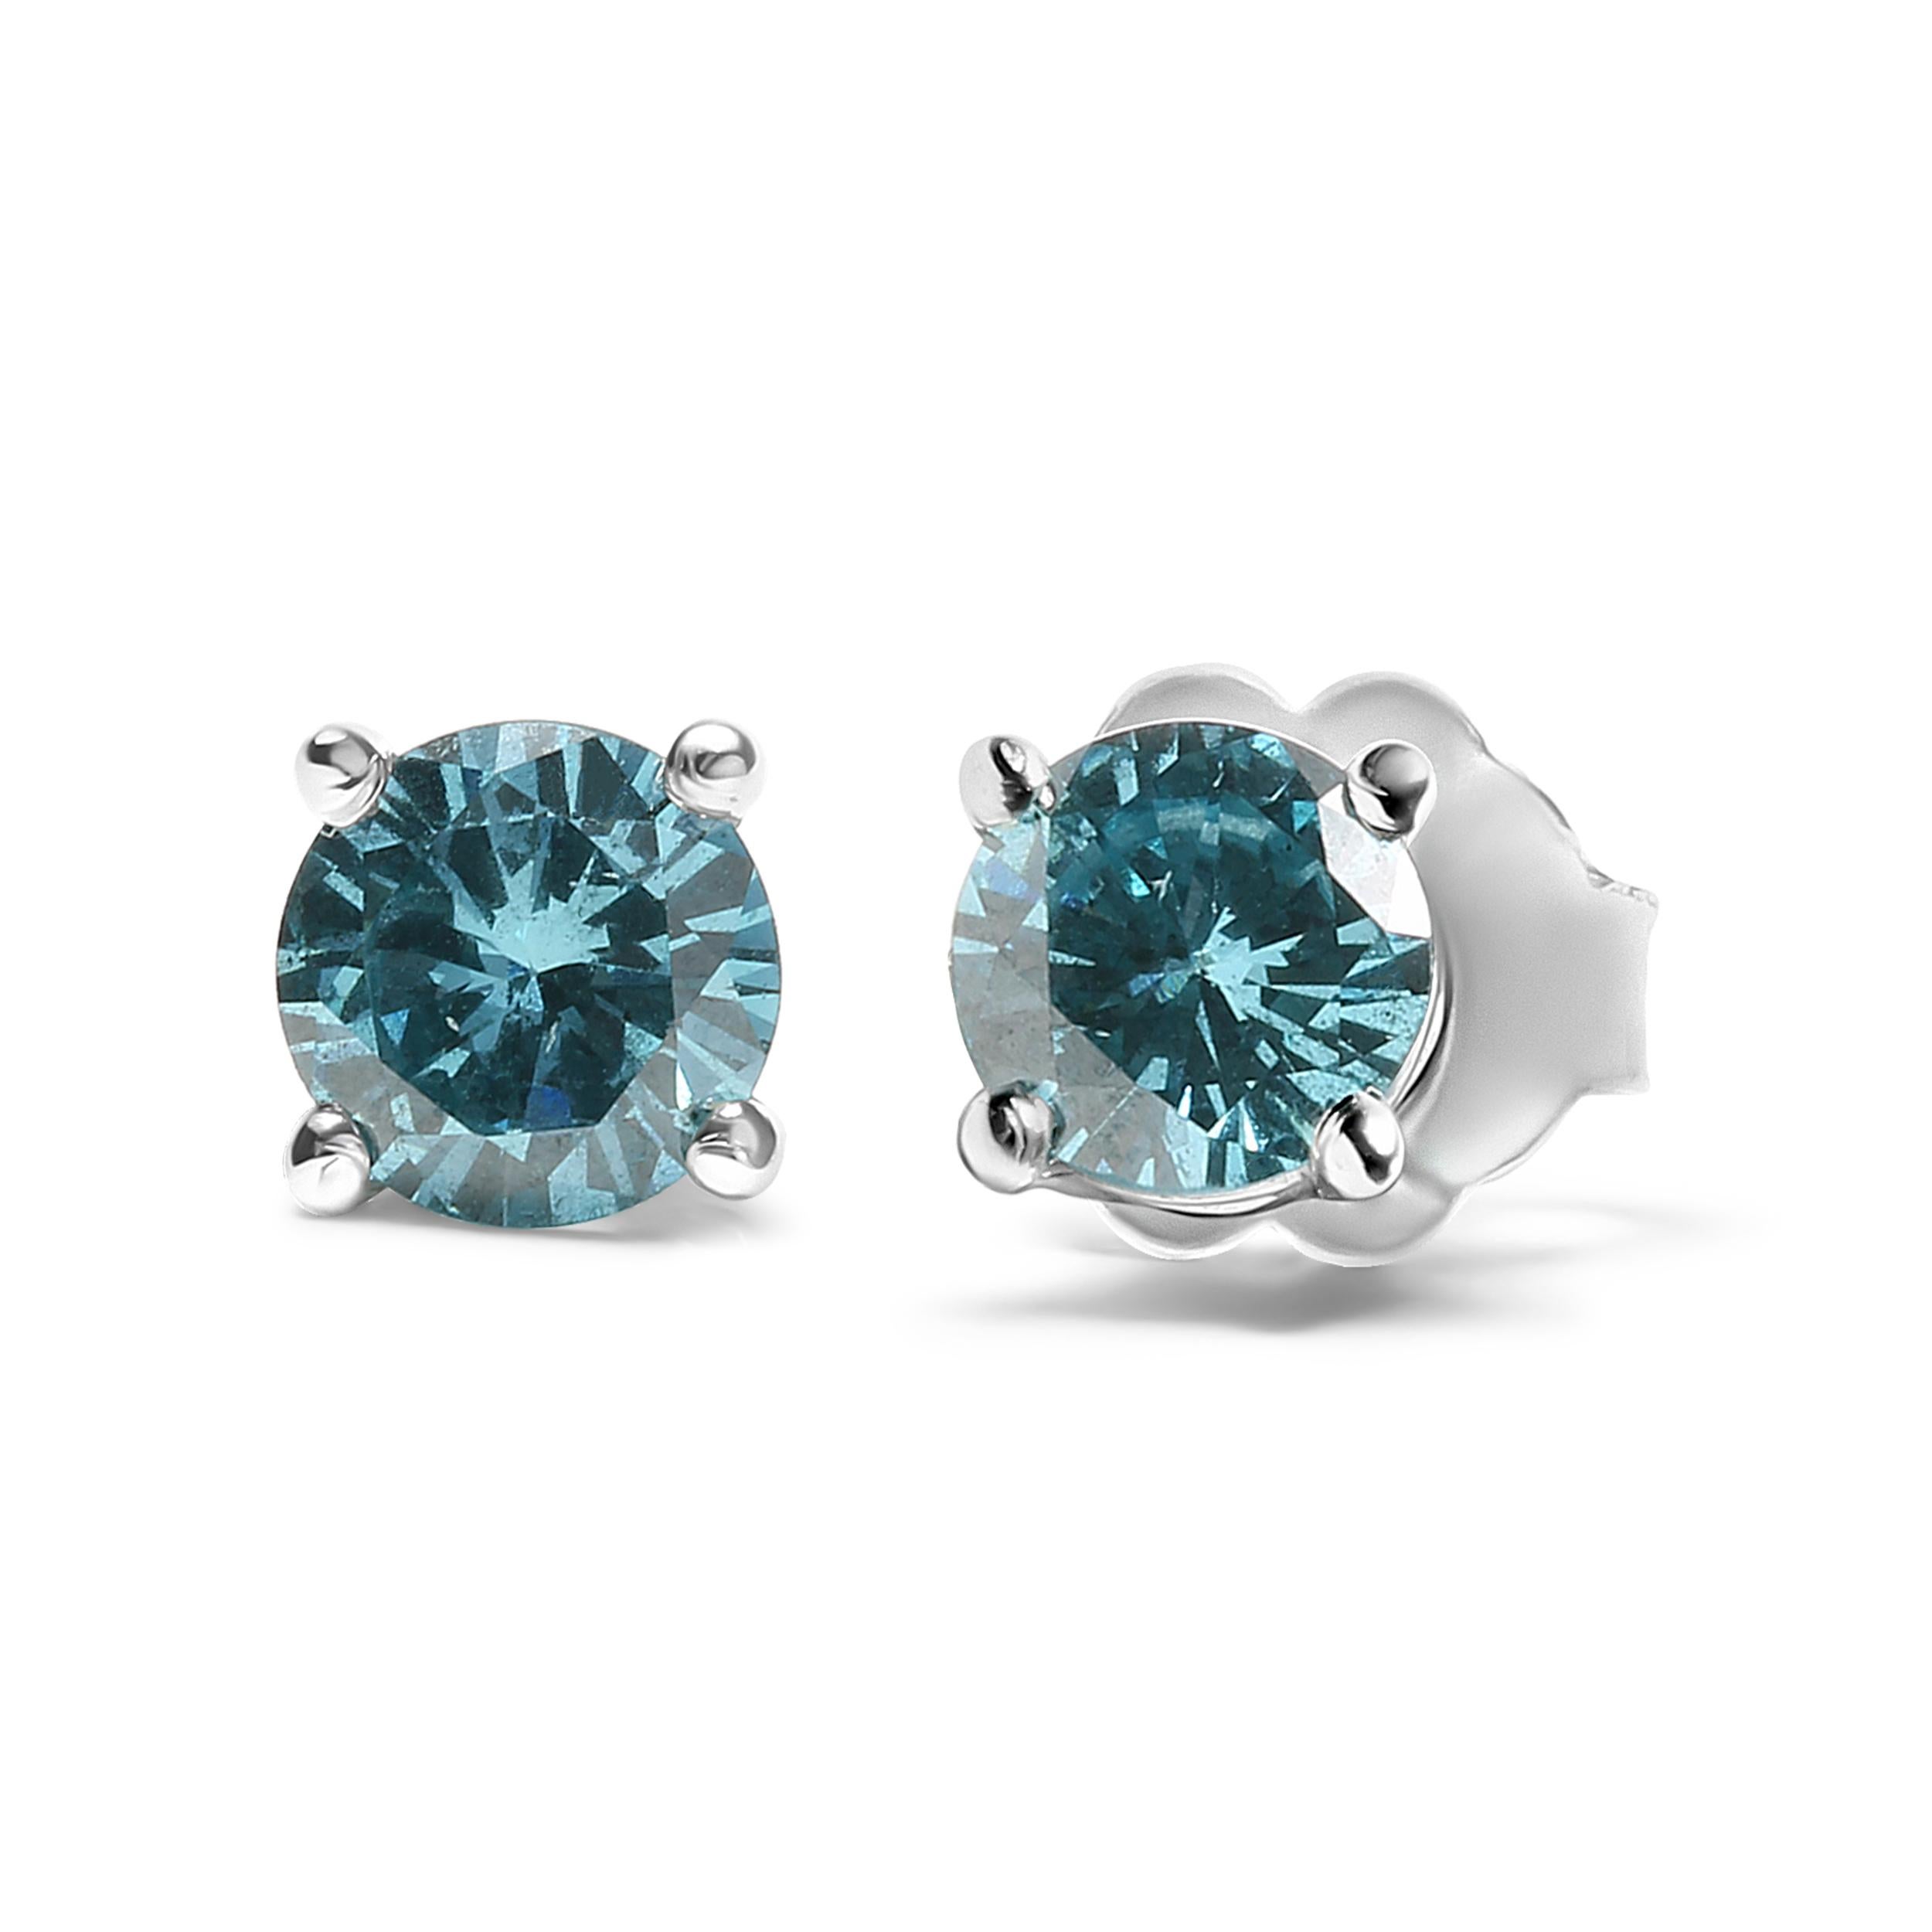 Add a touch of brilliance to your everyday look with these exquisite 14K White Gold stud earrings. Embellished with two shimmering round-cut aqua blue diamonds, each earring is a vision of beauty and elegance. These earrings are perfect for those